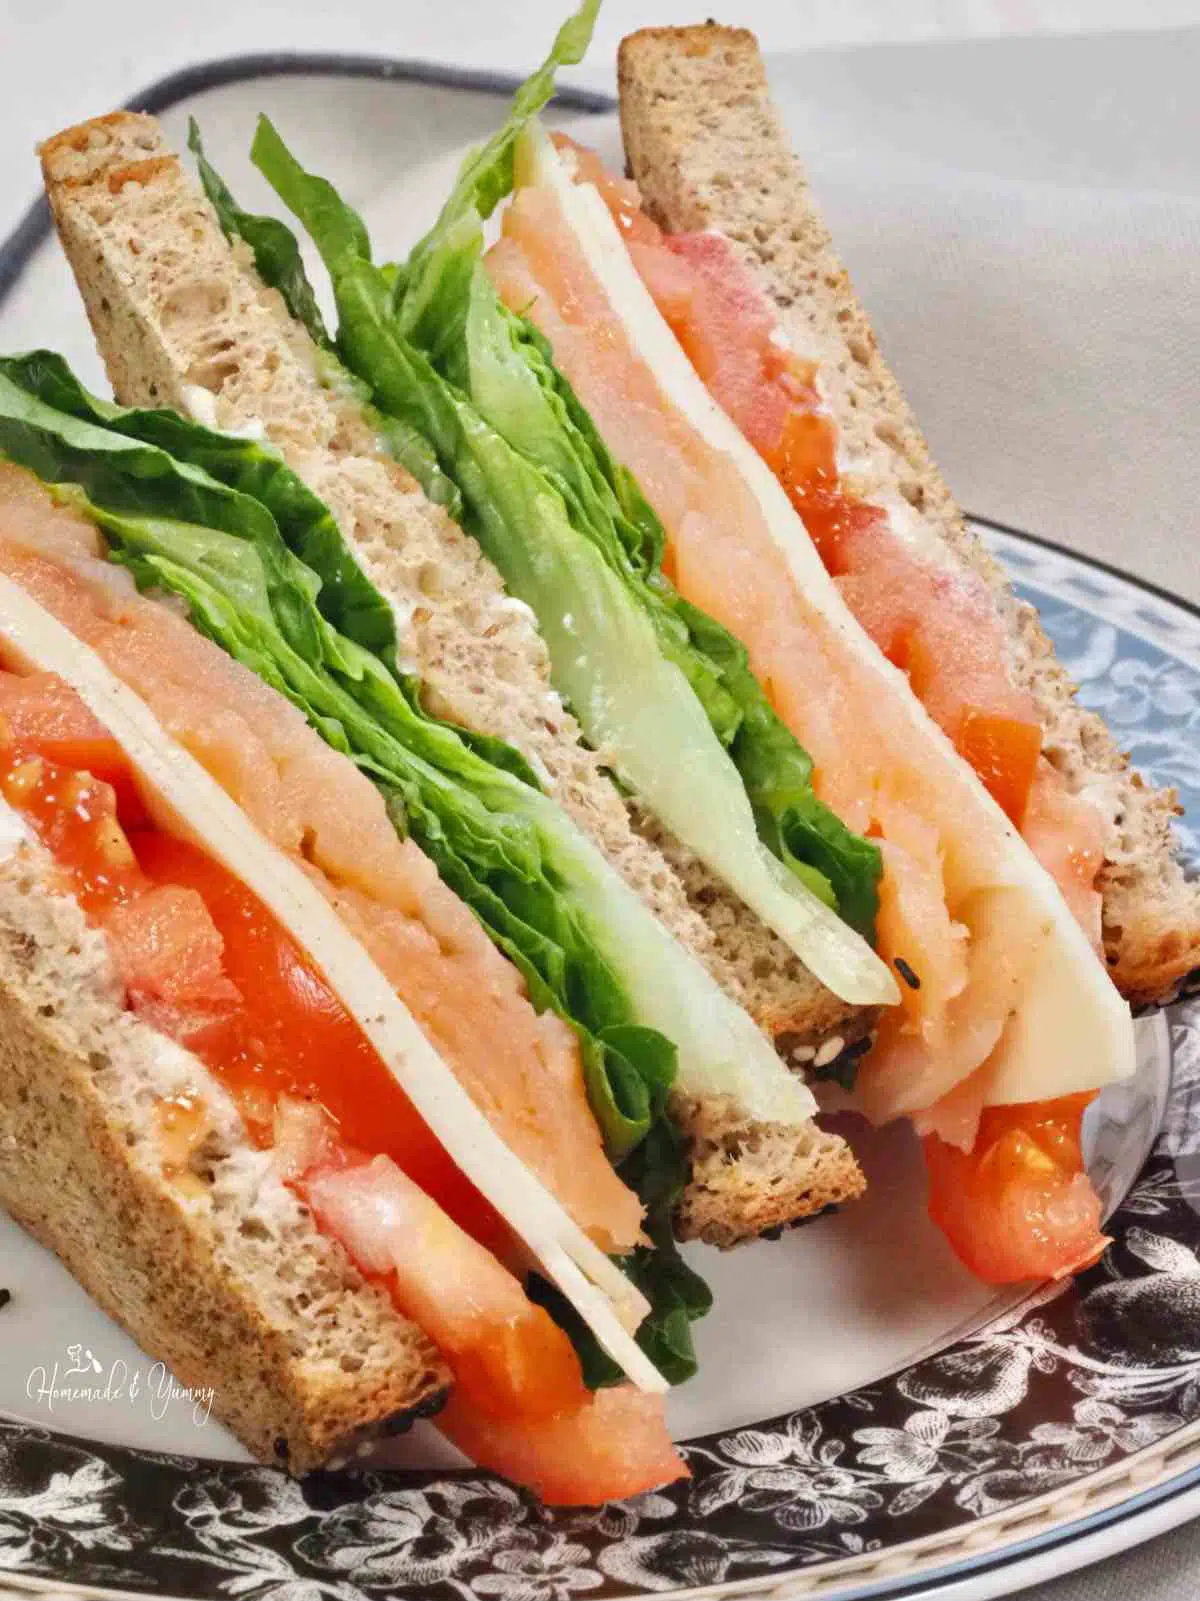 Sandwich with tomatoes, cheese, lettuce and smoked salmon.